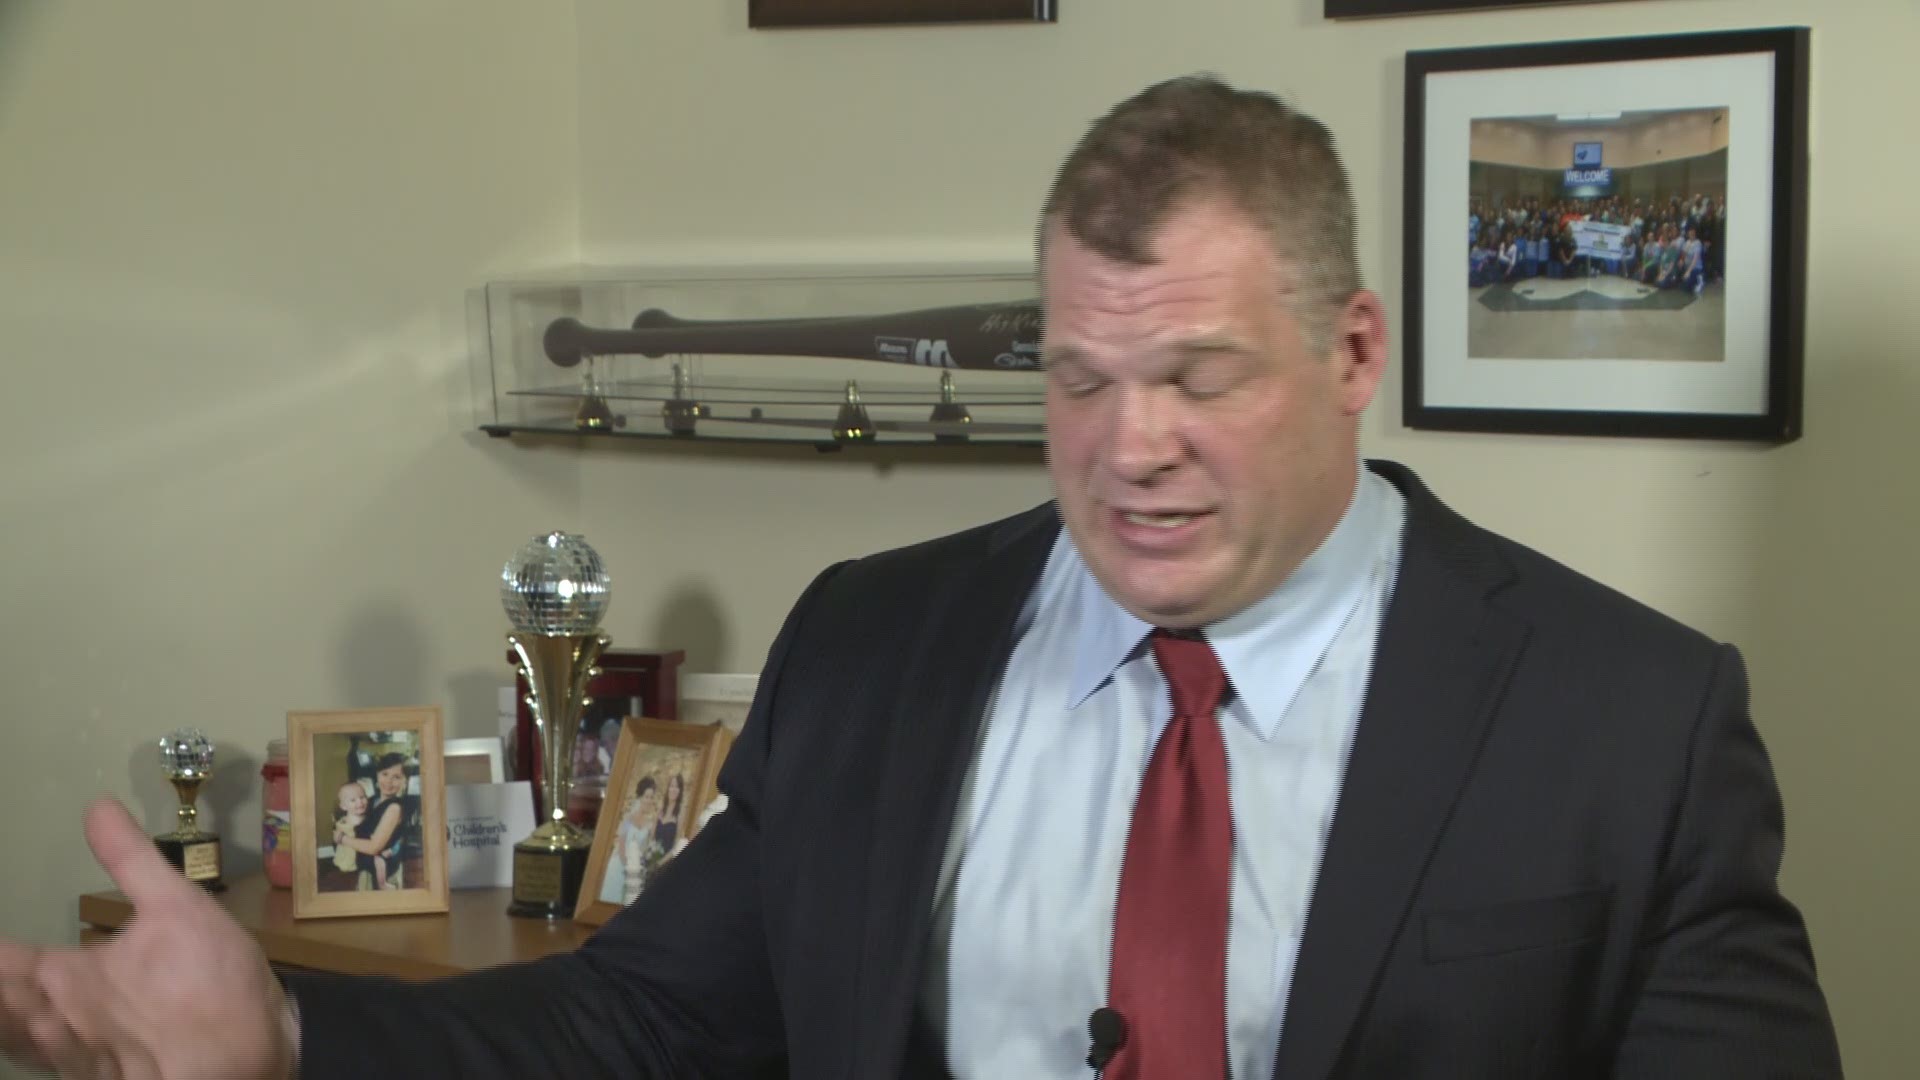 Glenn Jacobs, also known as WWE superstar Kane, explains his political philosophy